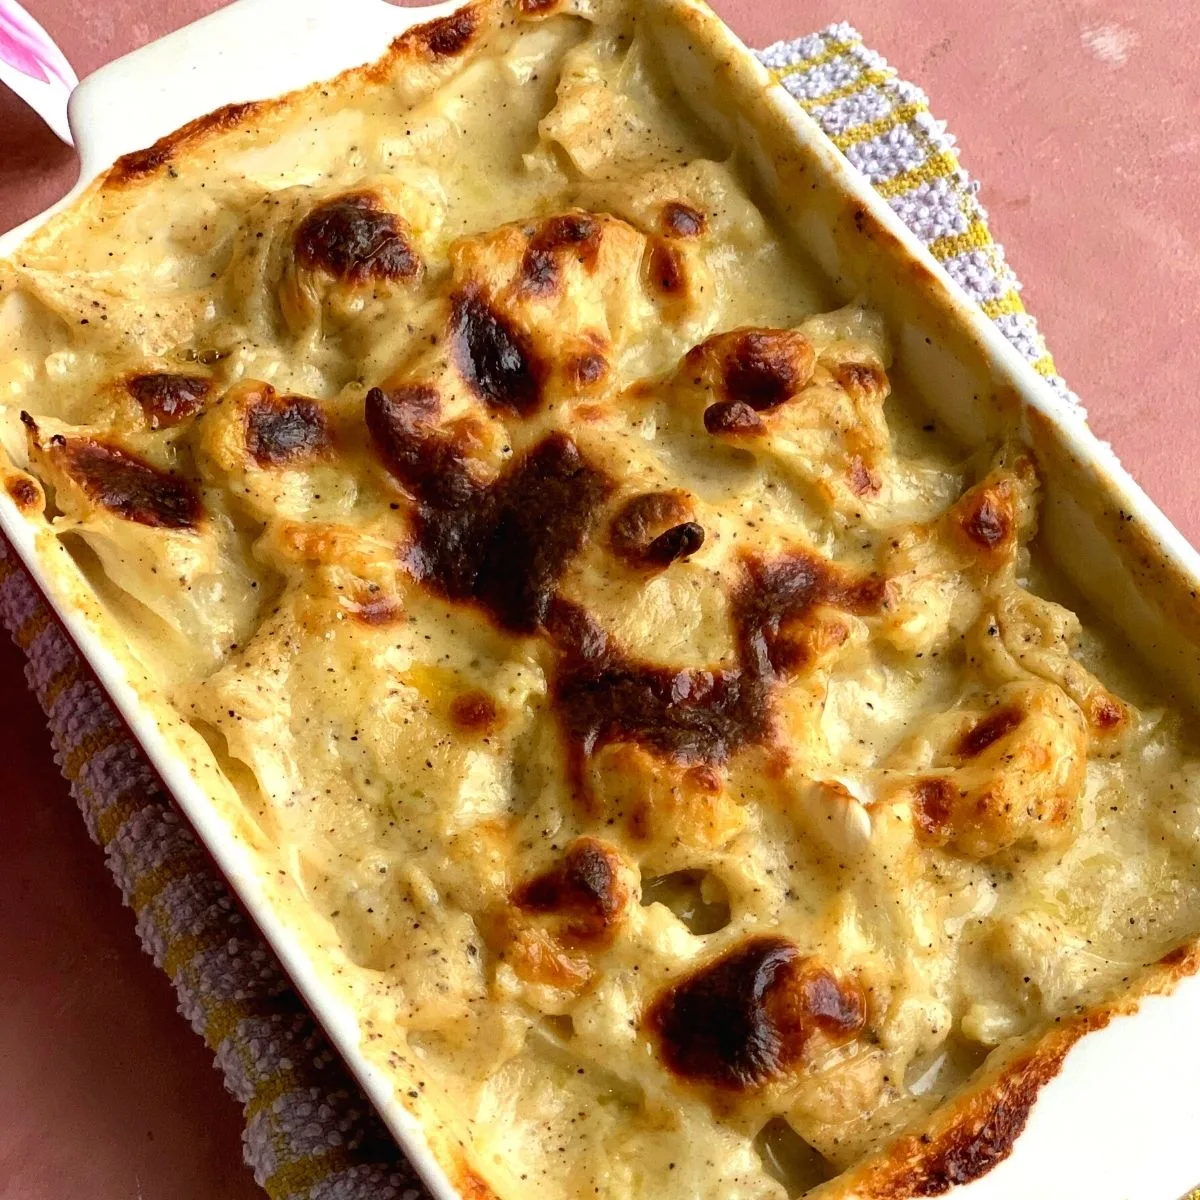 Easy Cauliflower Gratin is a delicious cheesy bake made using low carb cauliflower and the topped perfectly browned using flour, milk, and cheese.